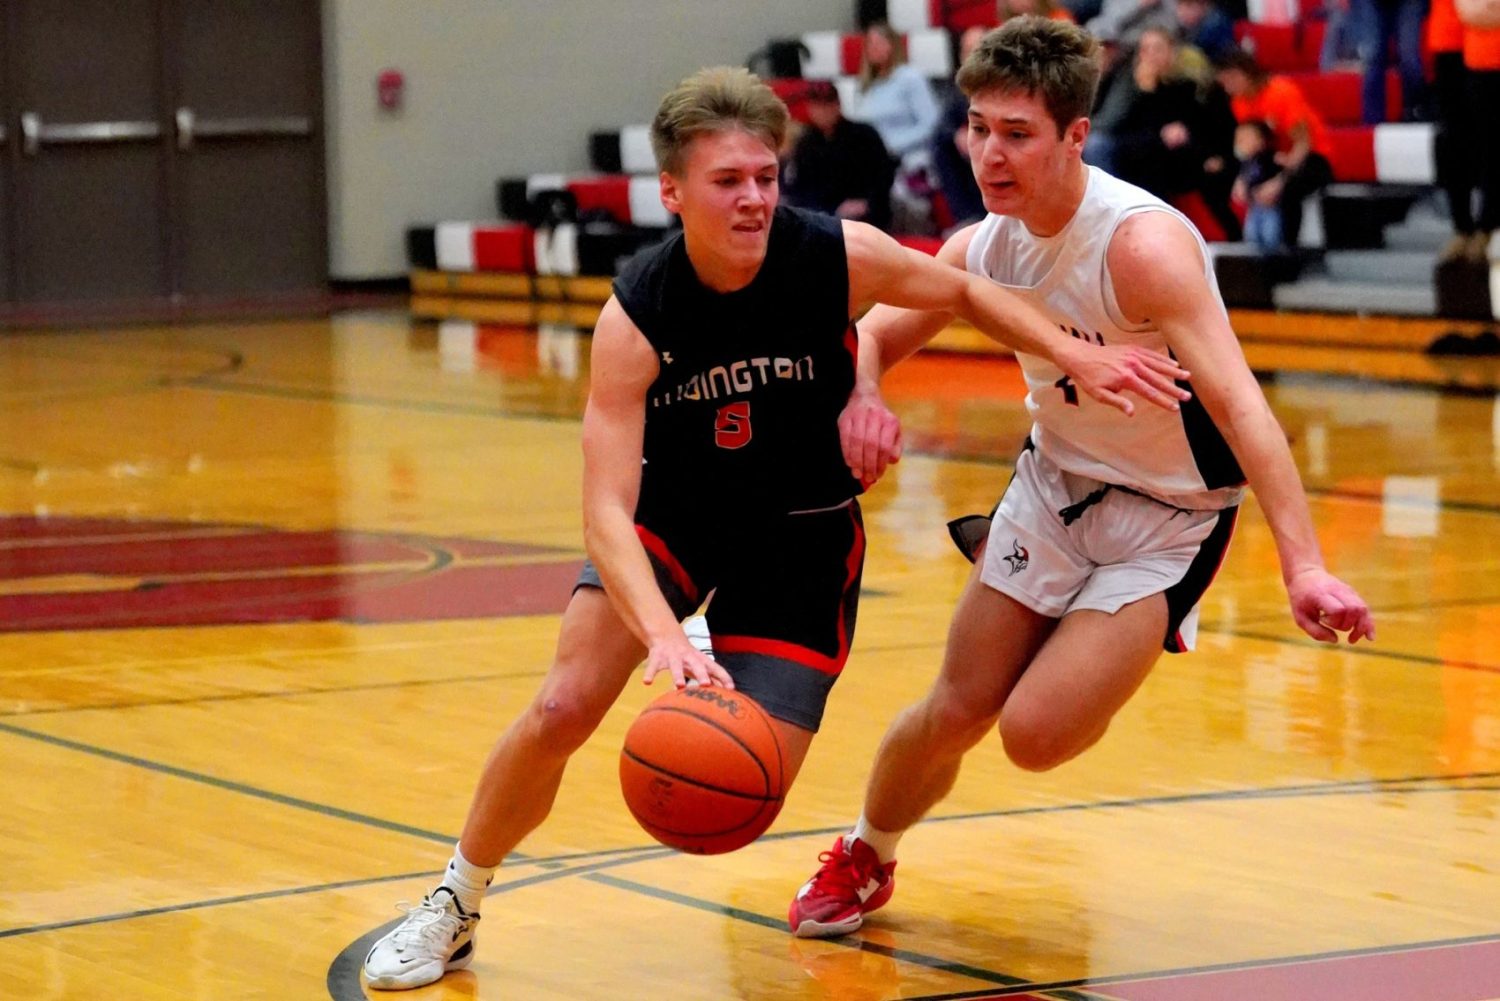 Westhouse has double-double in leading Ludington over Whitehall